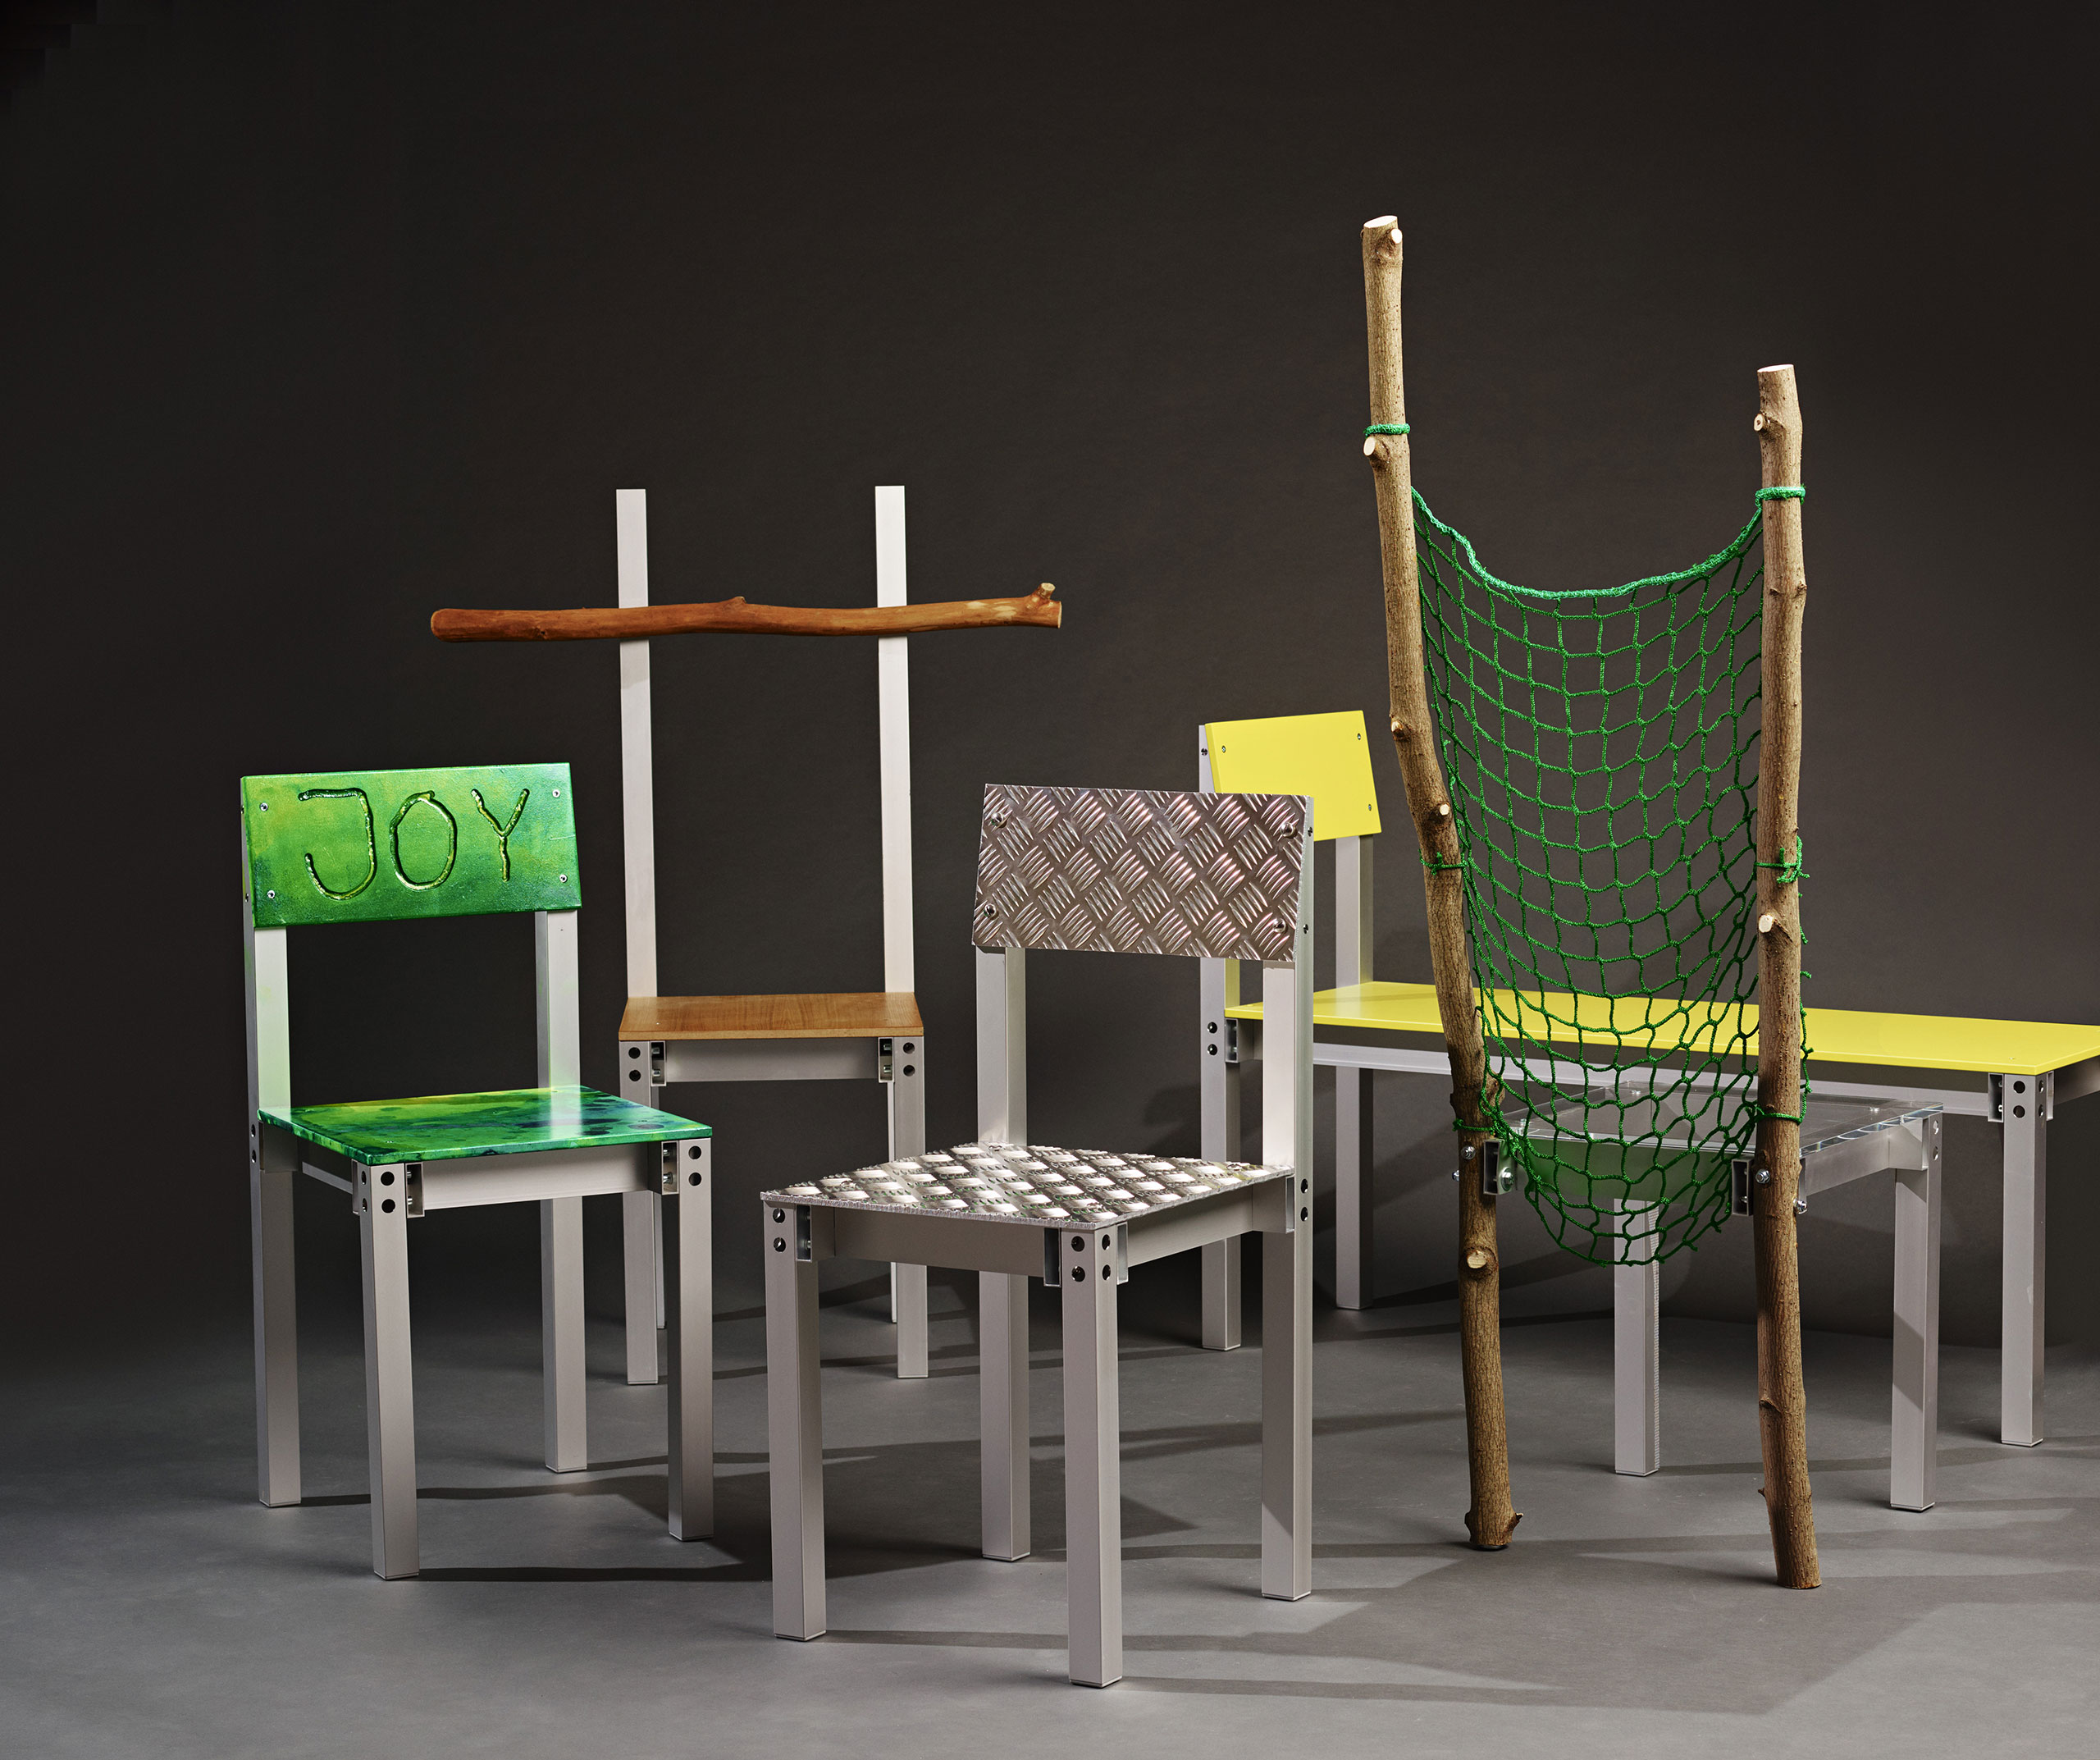 Bukowskis and designer Fredrik Paulsen hosted the exclusive FOUNDATION OF JOY auction at Stockholm Design Week, showcasing 33 objects created in 33 days. Photogtaphy © Bukowskis, FOUNDATION OF JOY.